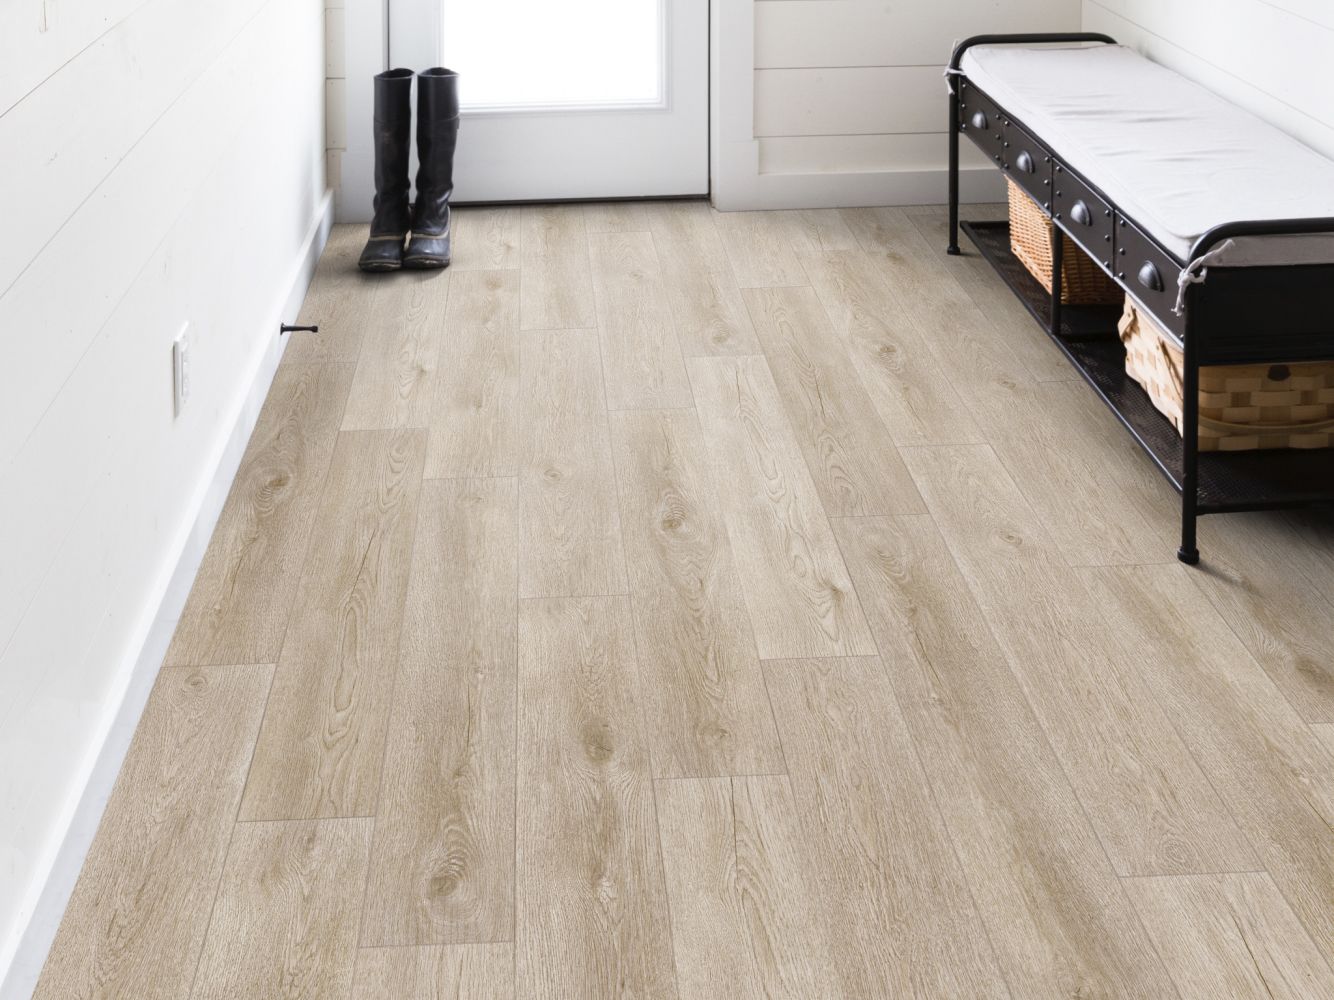 Shaw Floors Resilient Residential Paladin Plus Soft Beige 02094_0278V